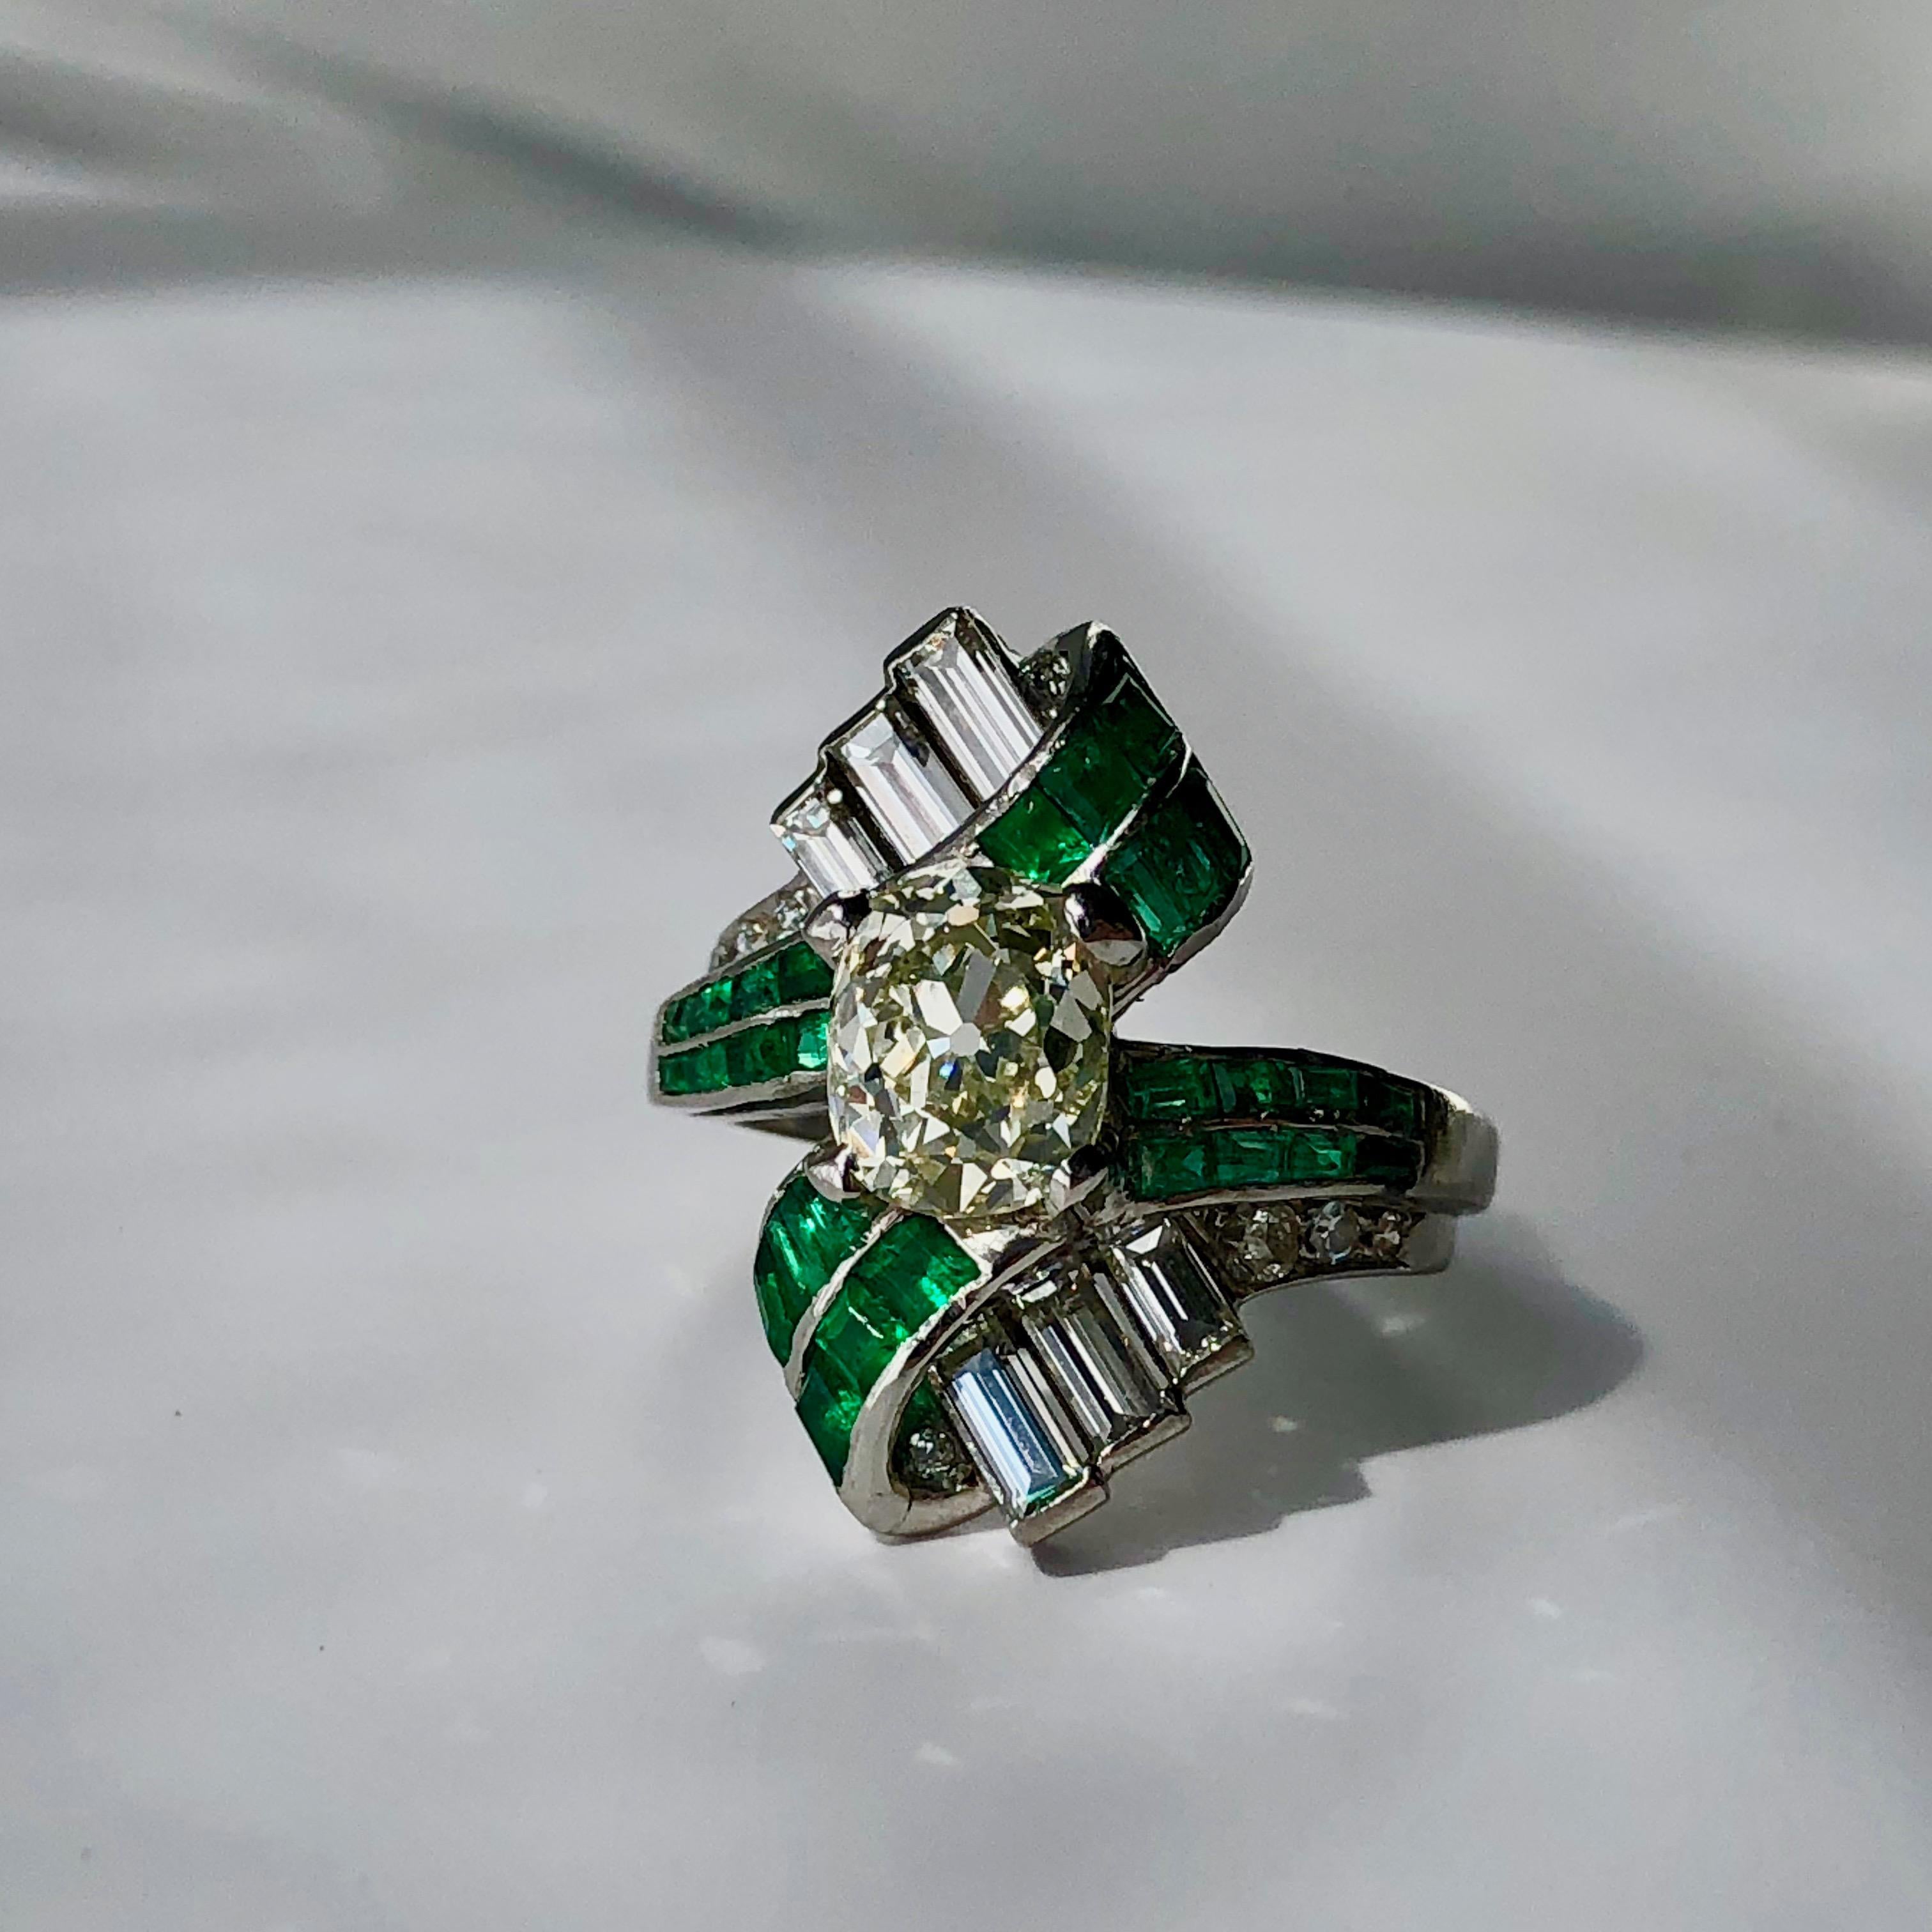 Antique Baguette Emerald And Old Cut Diamond Art Deco Cocktail Engagement Ring  im Zustand „Gut“ im Angebot in London, GB